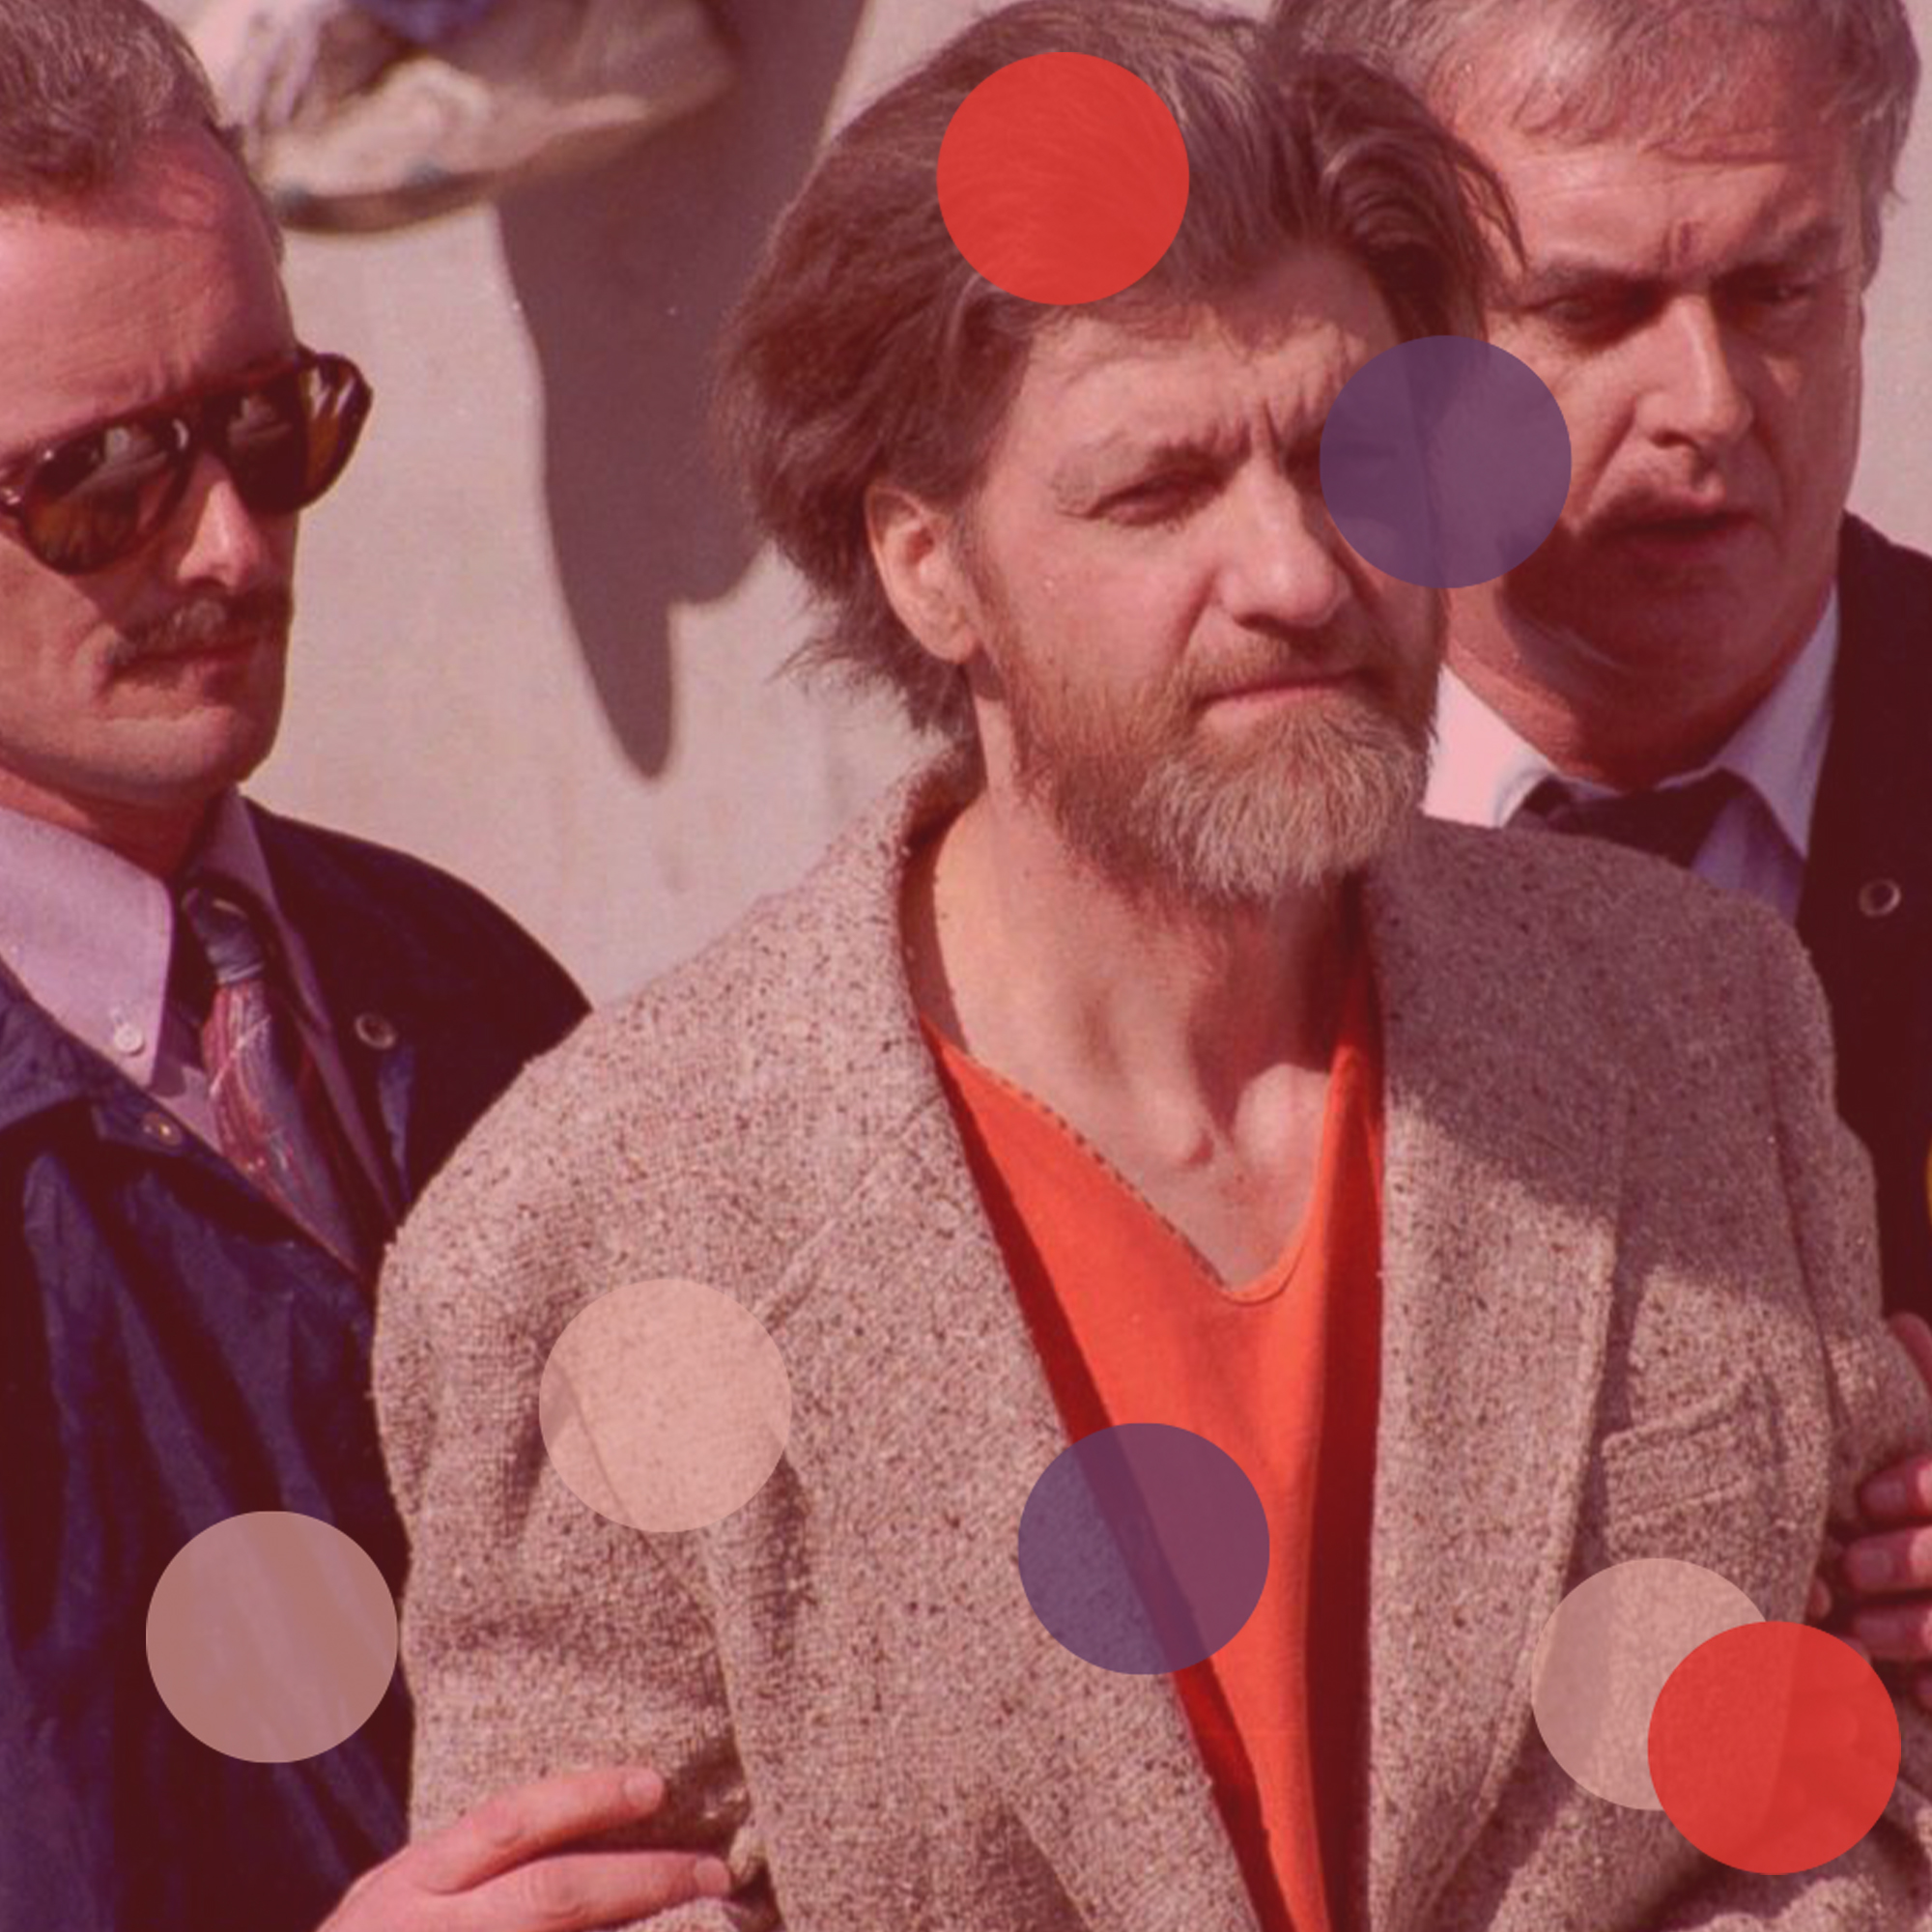 The Anniversary of “The Unabomber”